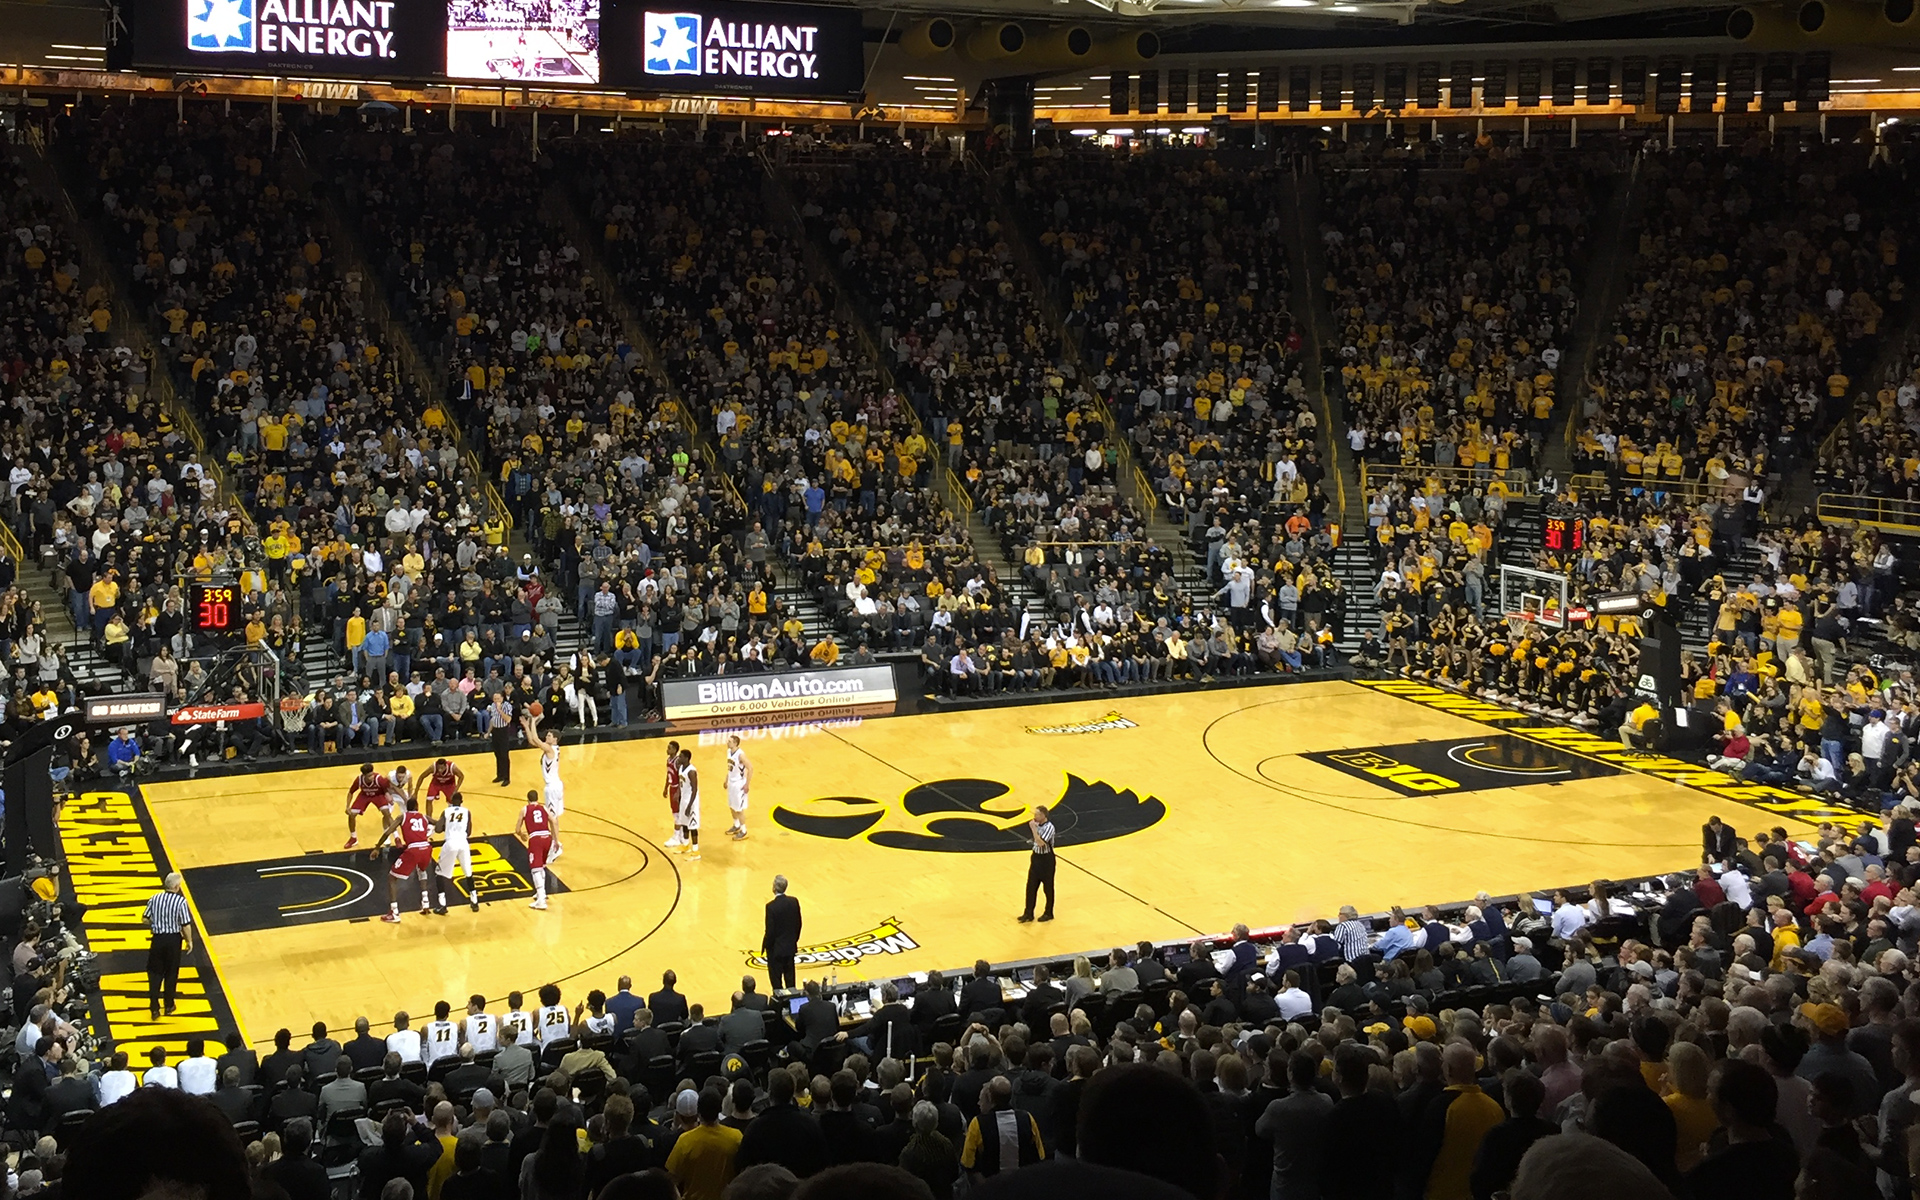 Carver Hawkeye Arena during an Iowa Men's Basketball game